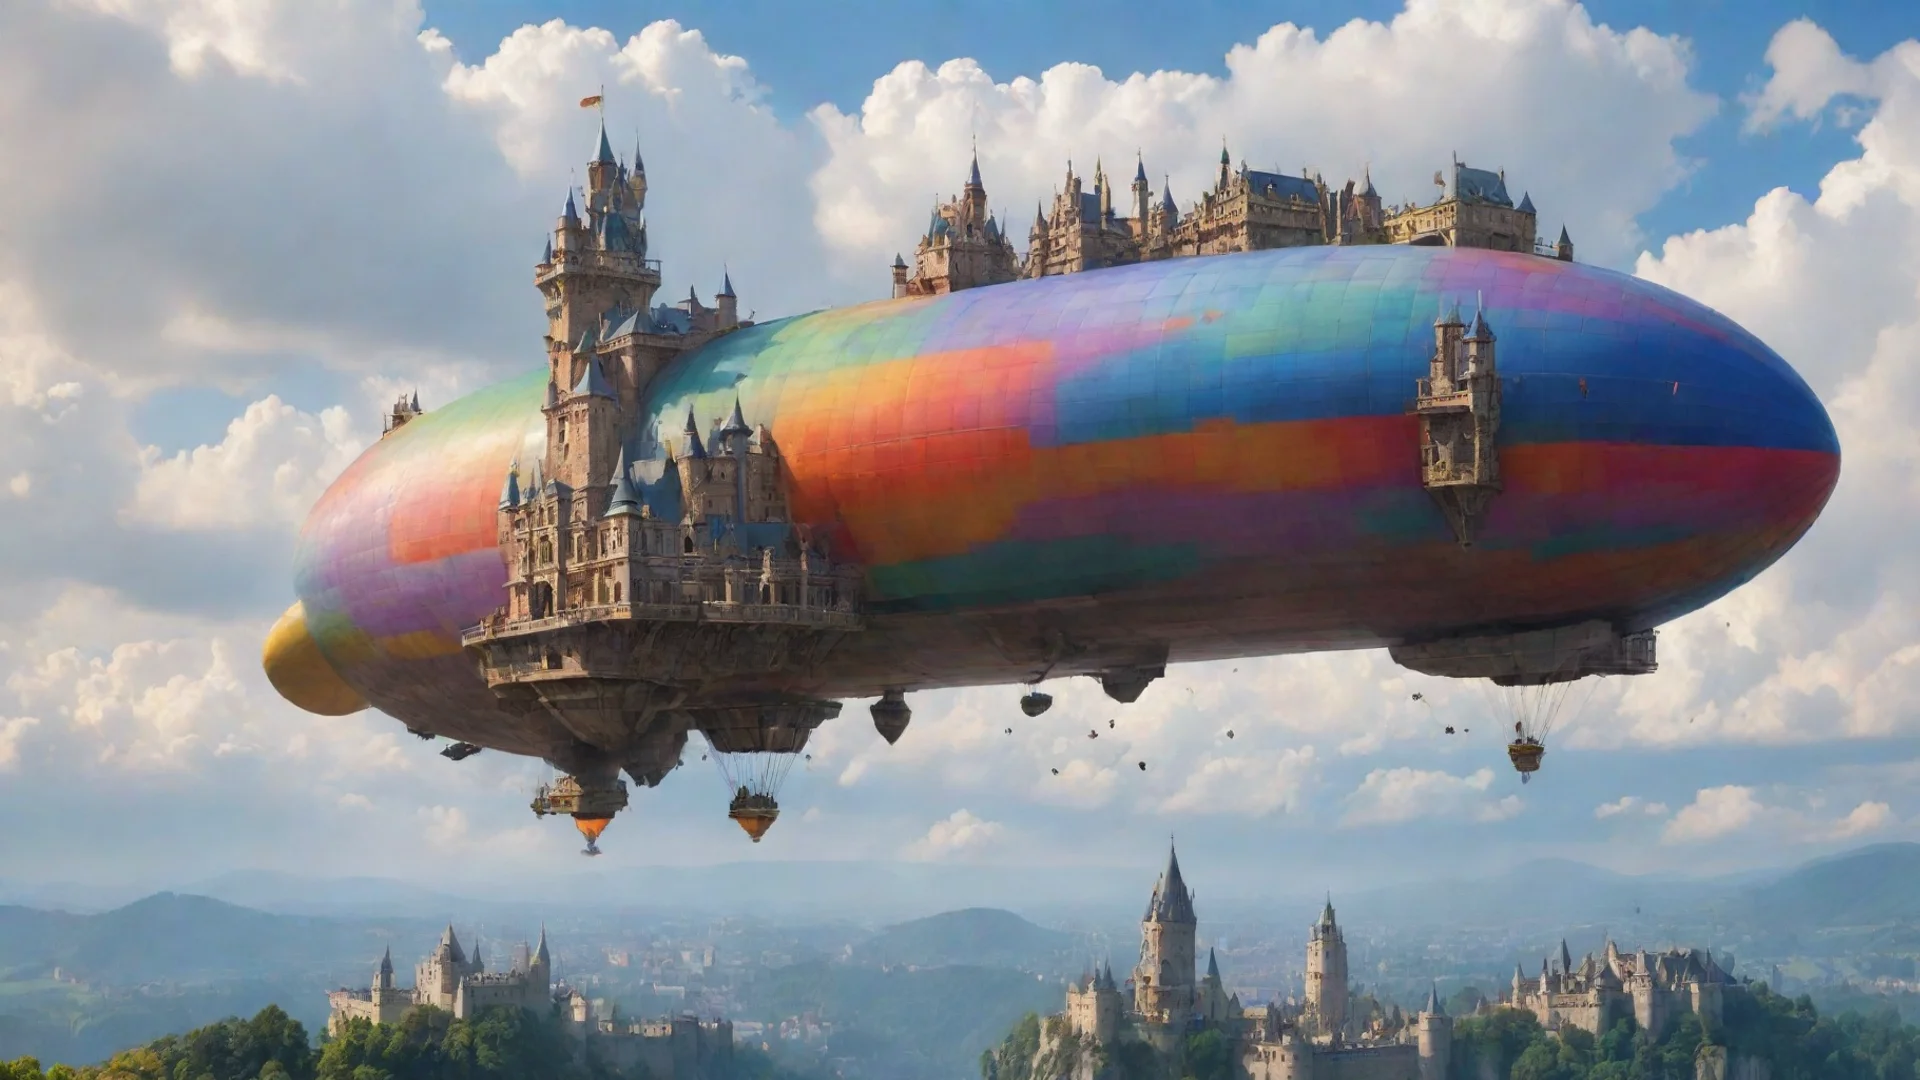 aitrending castle in sky amazing awesome architectural masterpiece wow hd colorful world floating blimp good looking fantastic 1 wide